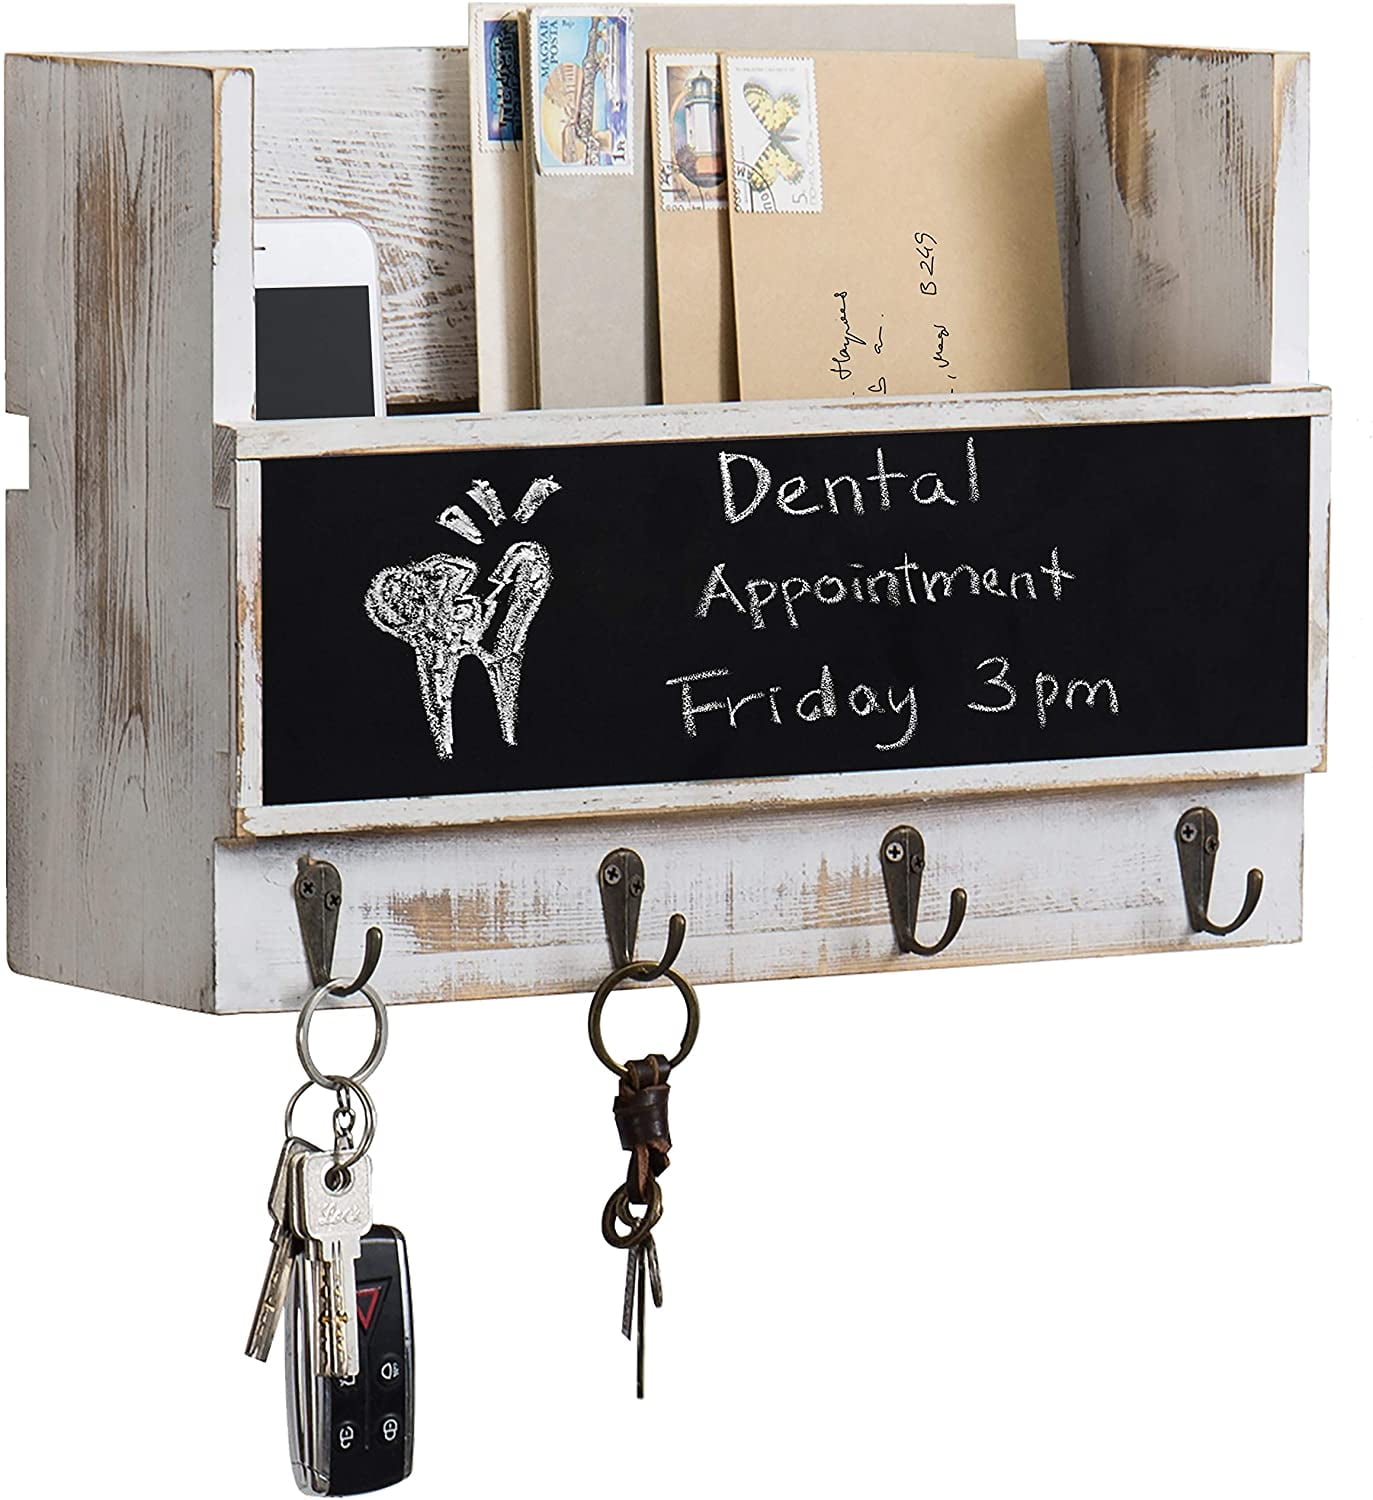 MyGift Rustic Grey Wood Wall-Mounted Mail Sorter Rack with 5 Key Hooks and Black Chalkboard